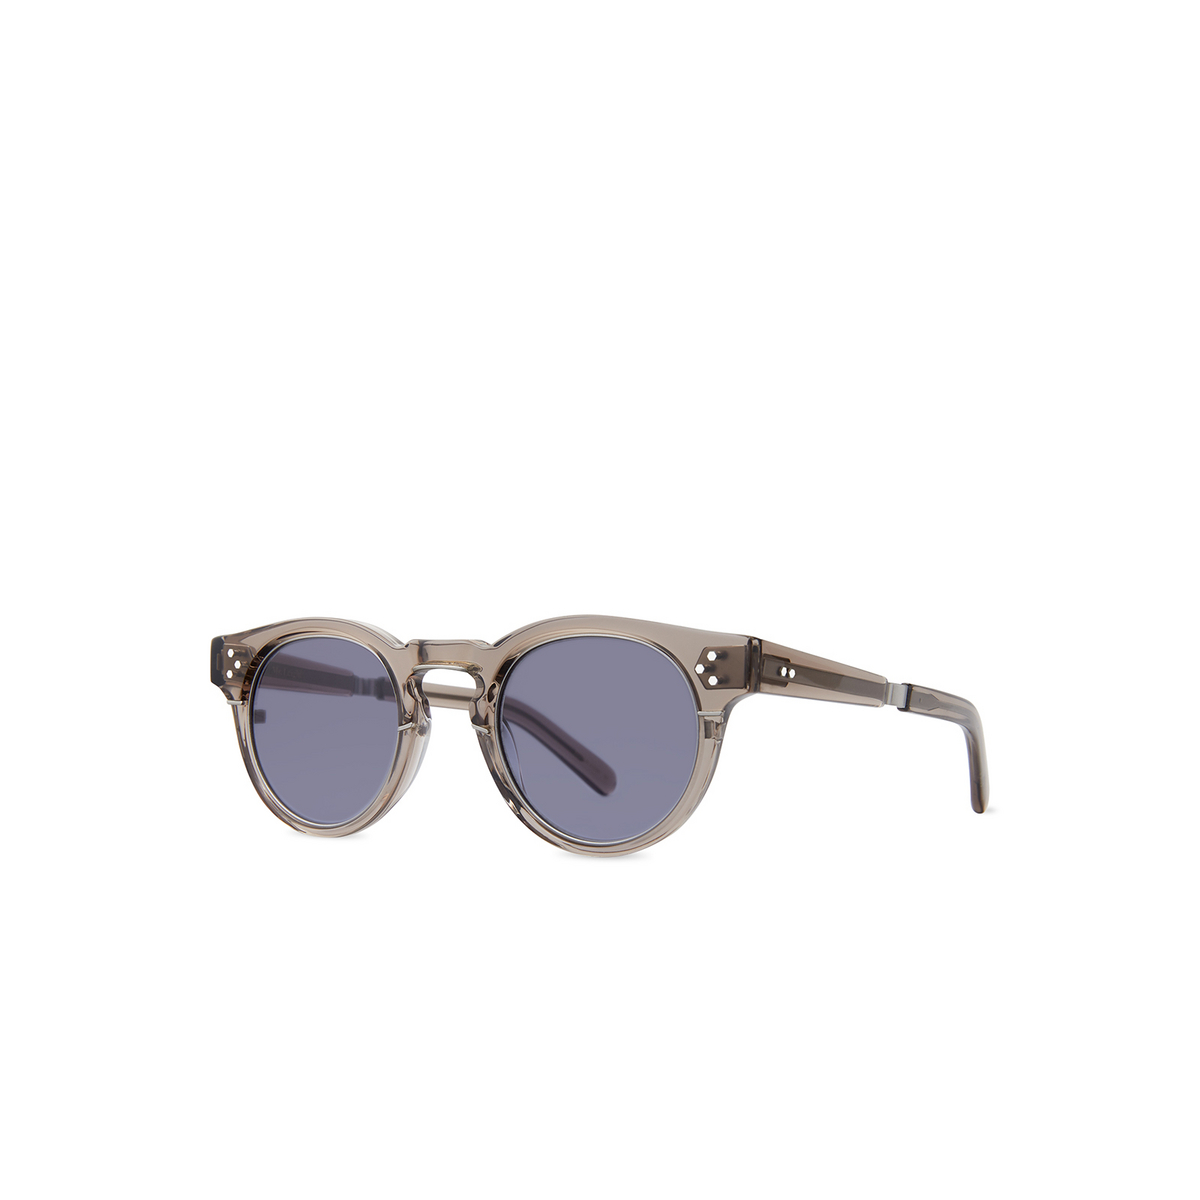 Mr. Leight KENNEDY S Sunglasses GRYCRY-MPLT/PACIG Grey Crystal-Matte Platinum - three-quarters view